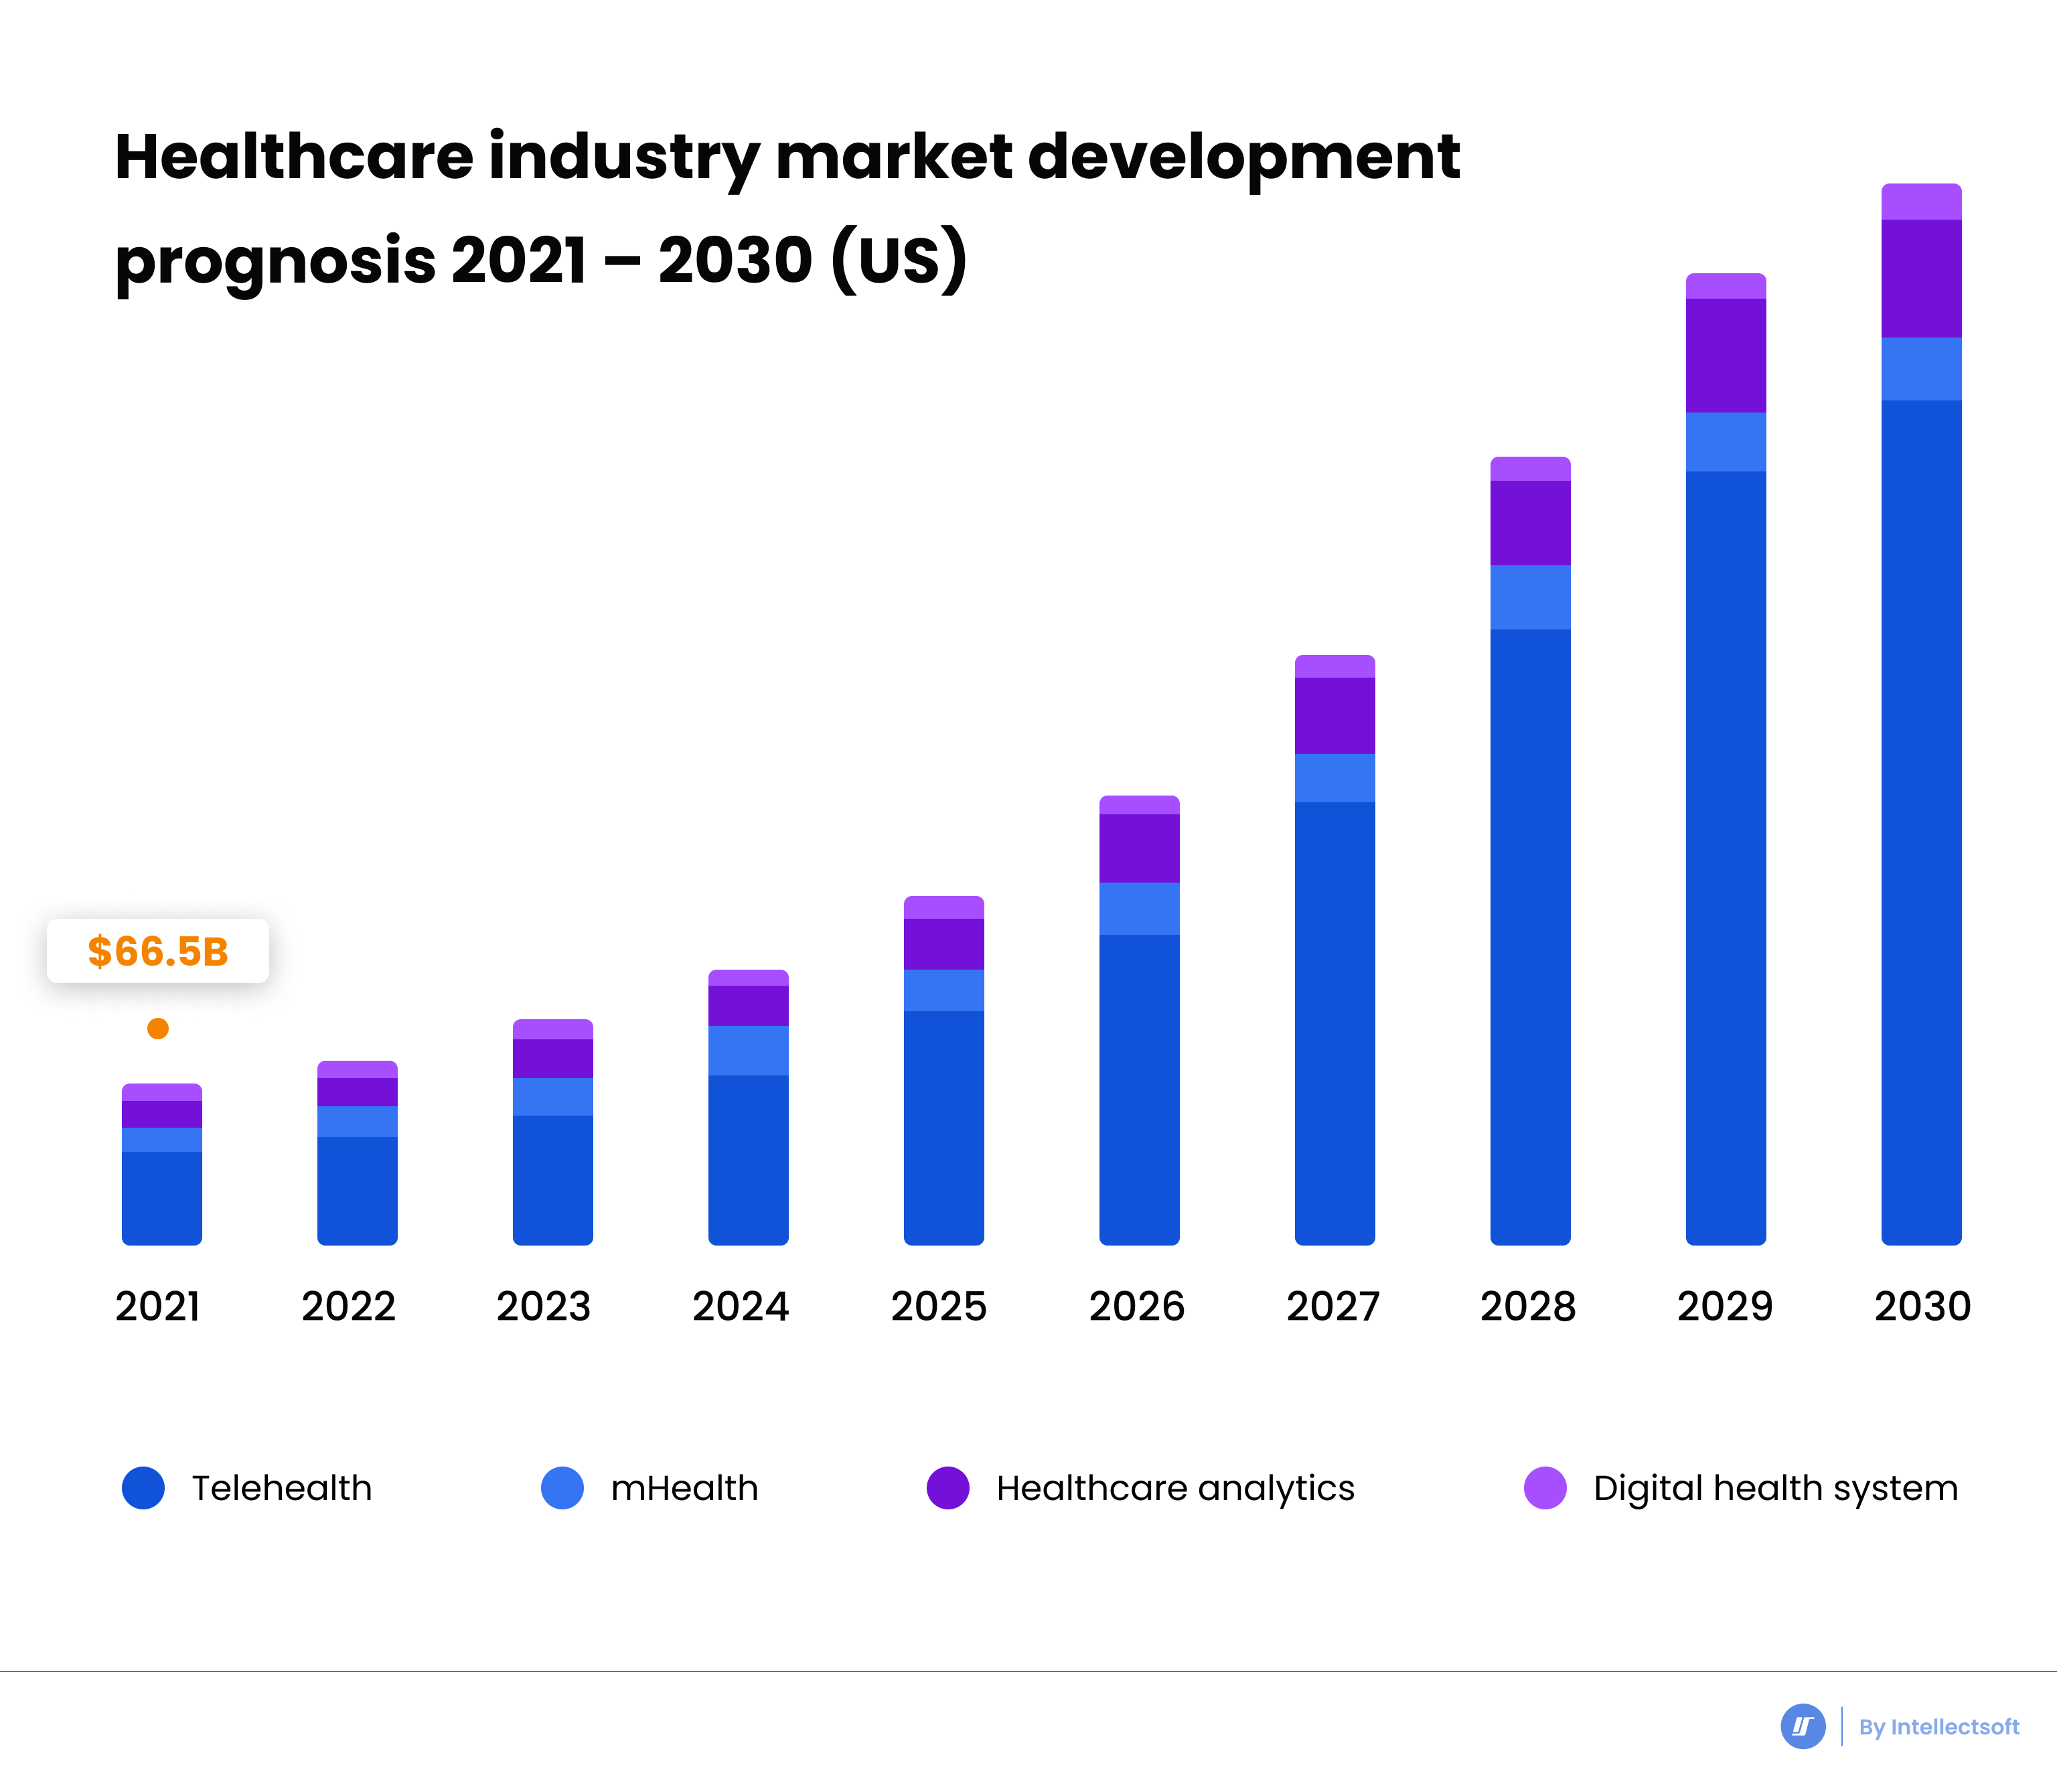 Graph of the healthcare industry market development prognosis in US (2021-2030) 